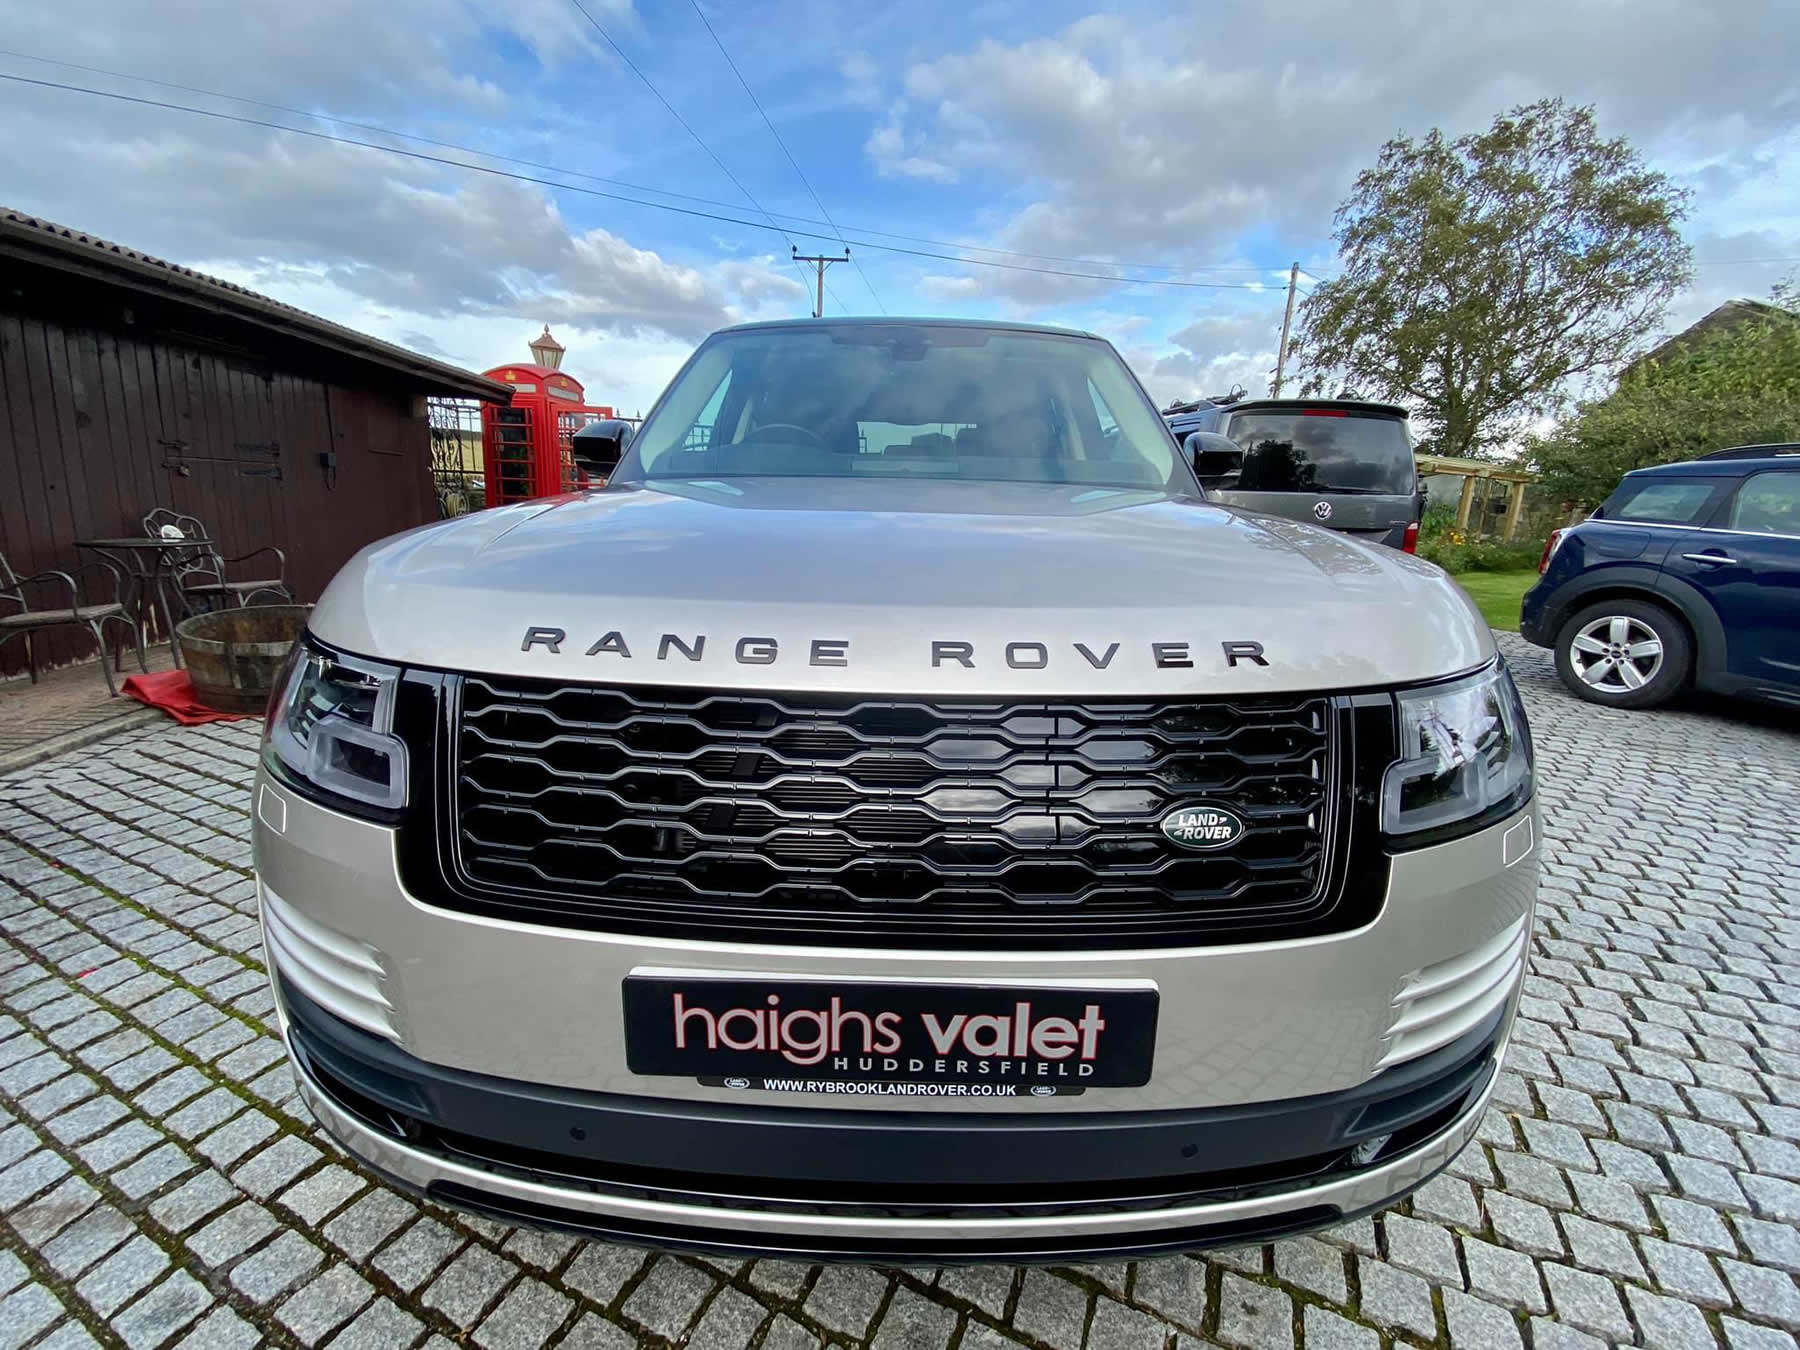 Haighs Valet Huddersfield - © Haighs Valet <br />
<b>Strict Standards</b>:  date(): We selected 'Europe/Berlin' for 'CEST/2.0/DST' instead in <b>/homepages/20/d164784699/htdocs/gallery.php</b> on line <b>219</b><br />
2022